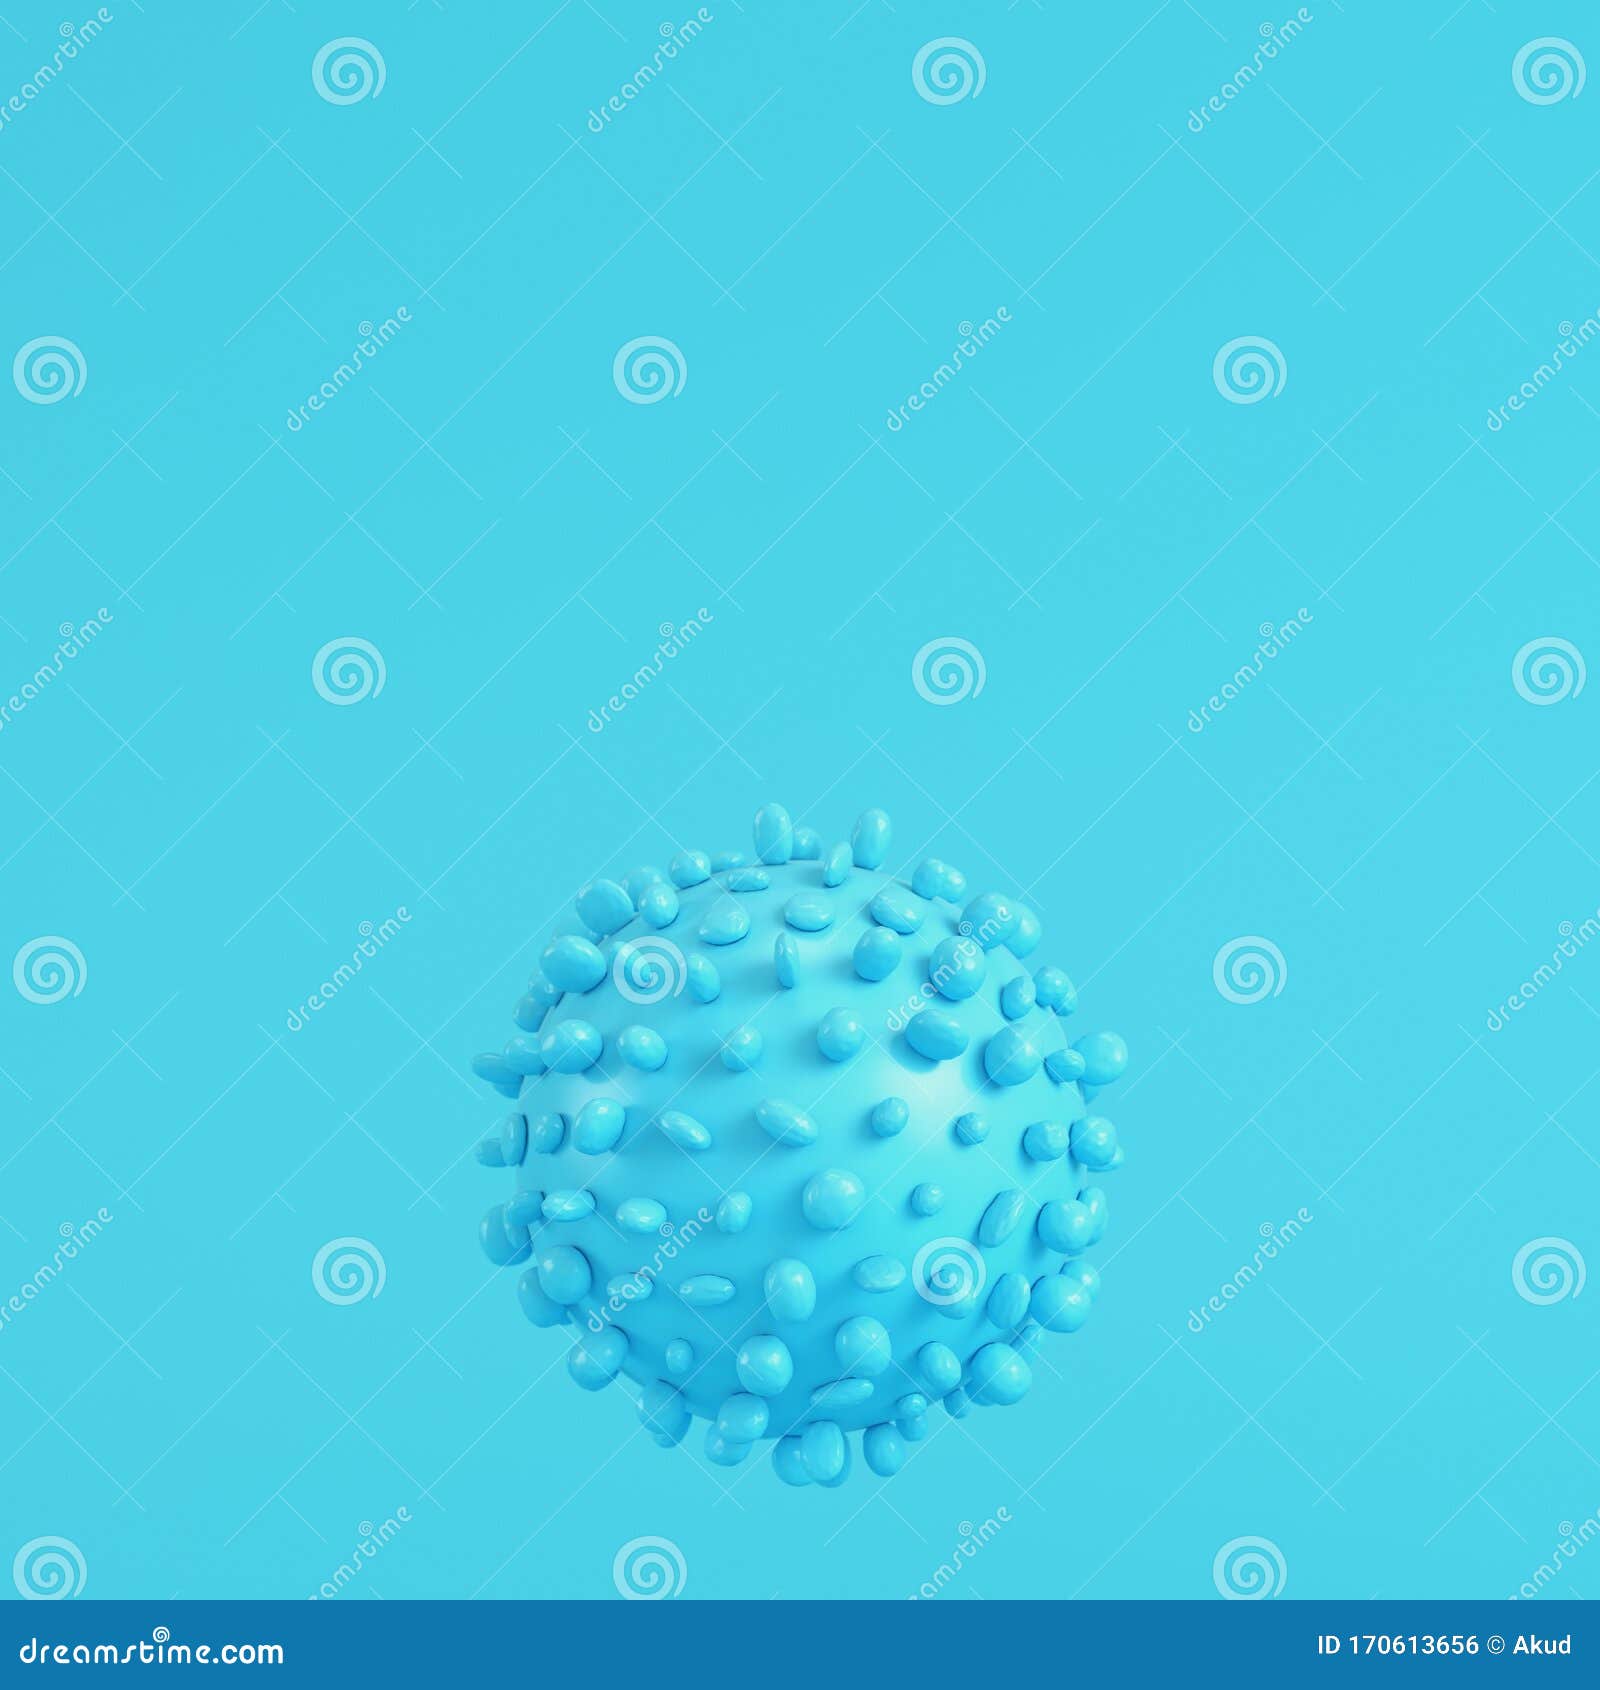 Virus On Bright Blue Background In Pastel Colors Stock Illustration Illustration Of Bright Pandemic